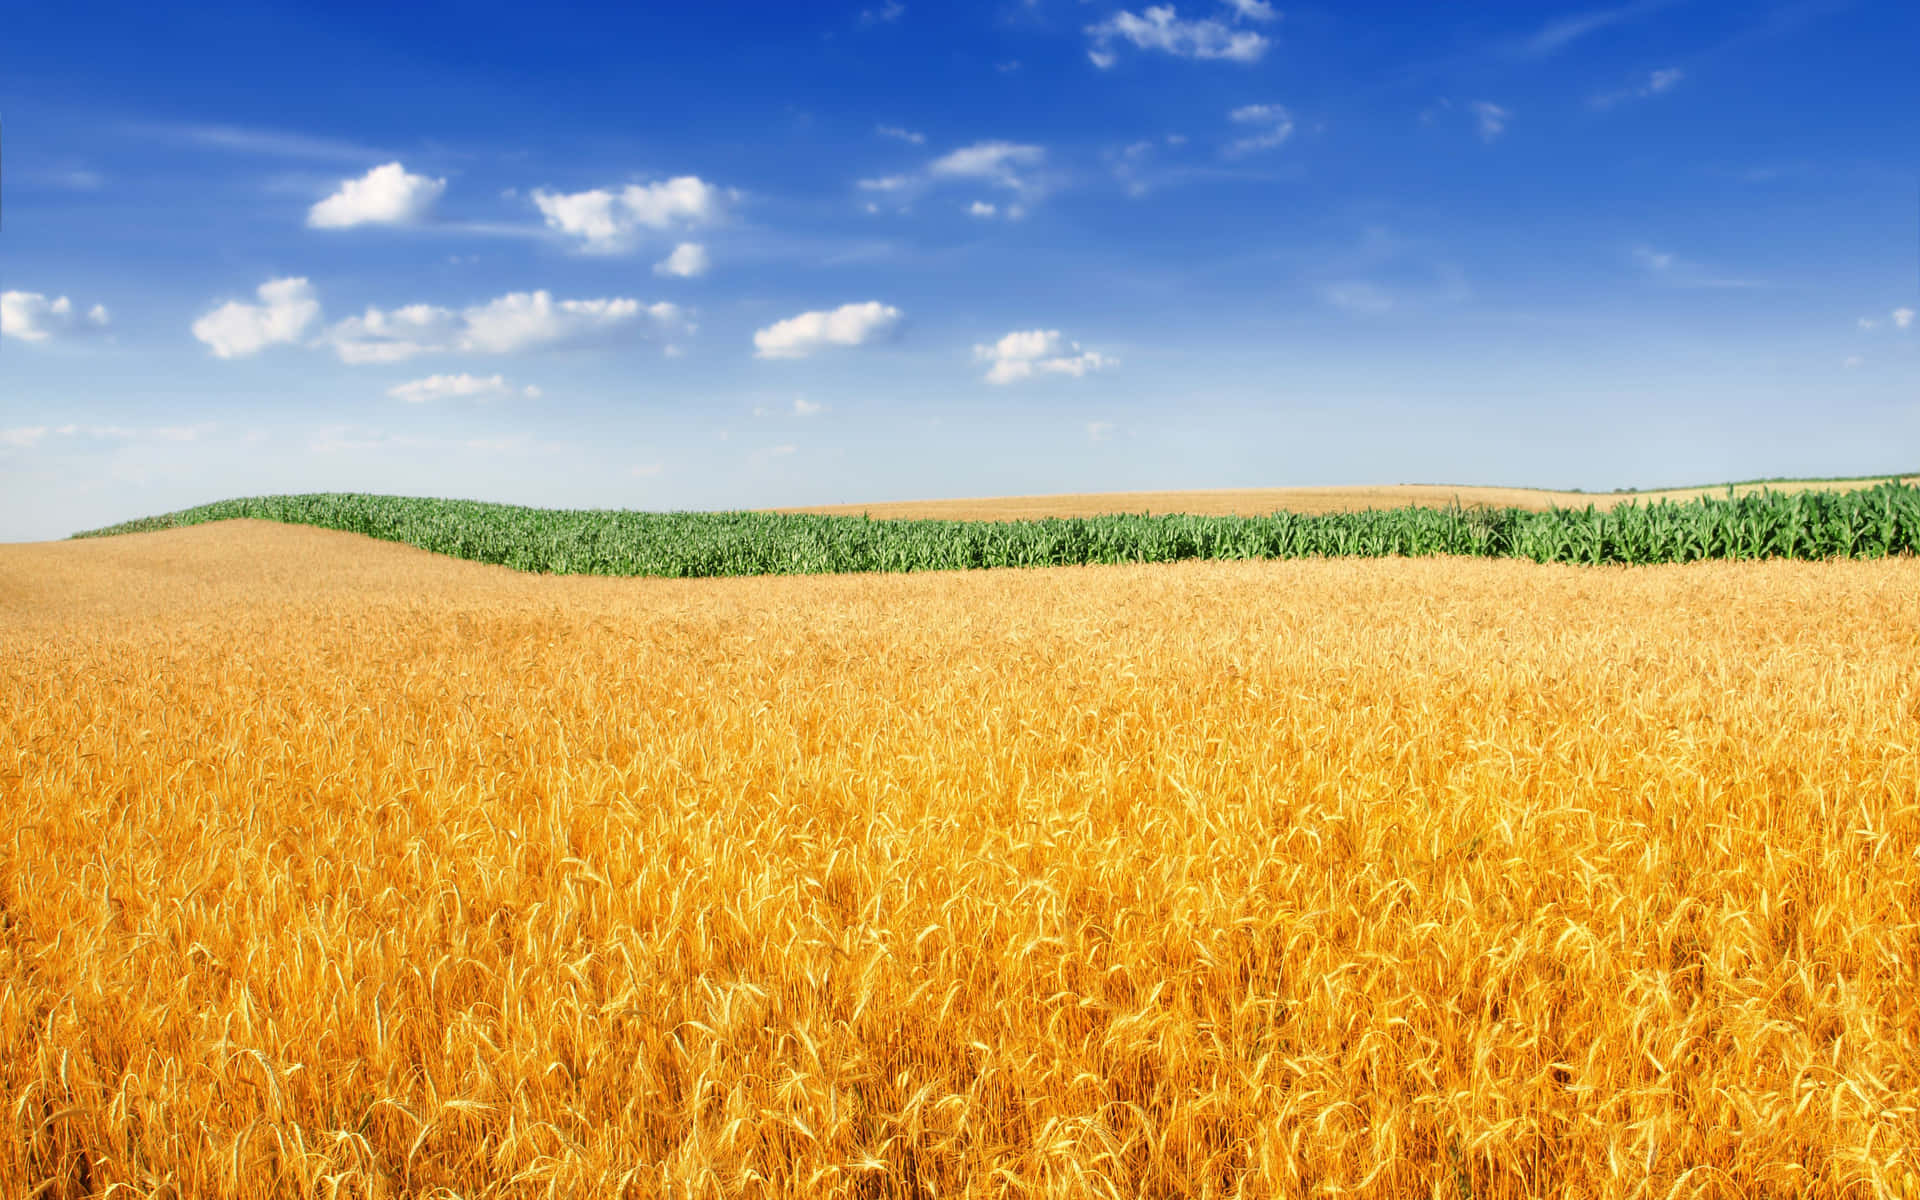 "Rising above the horizon, a picturesque view of a wheat field"